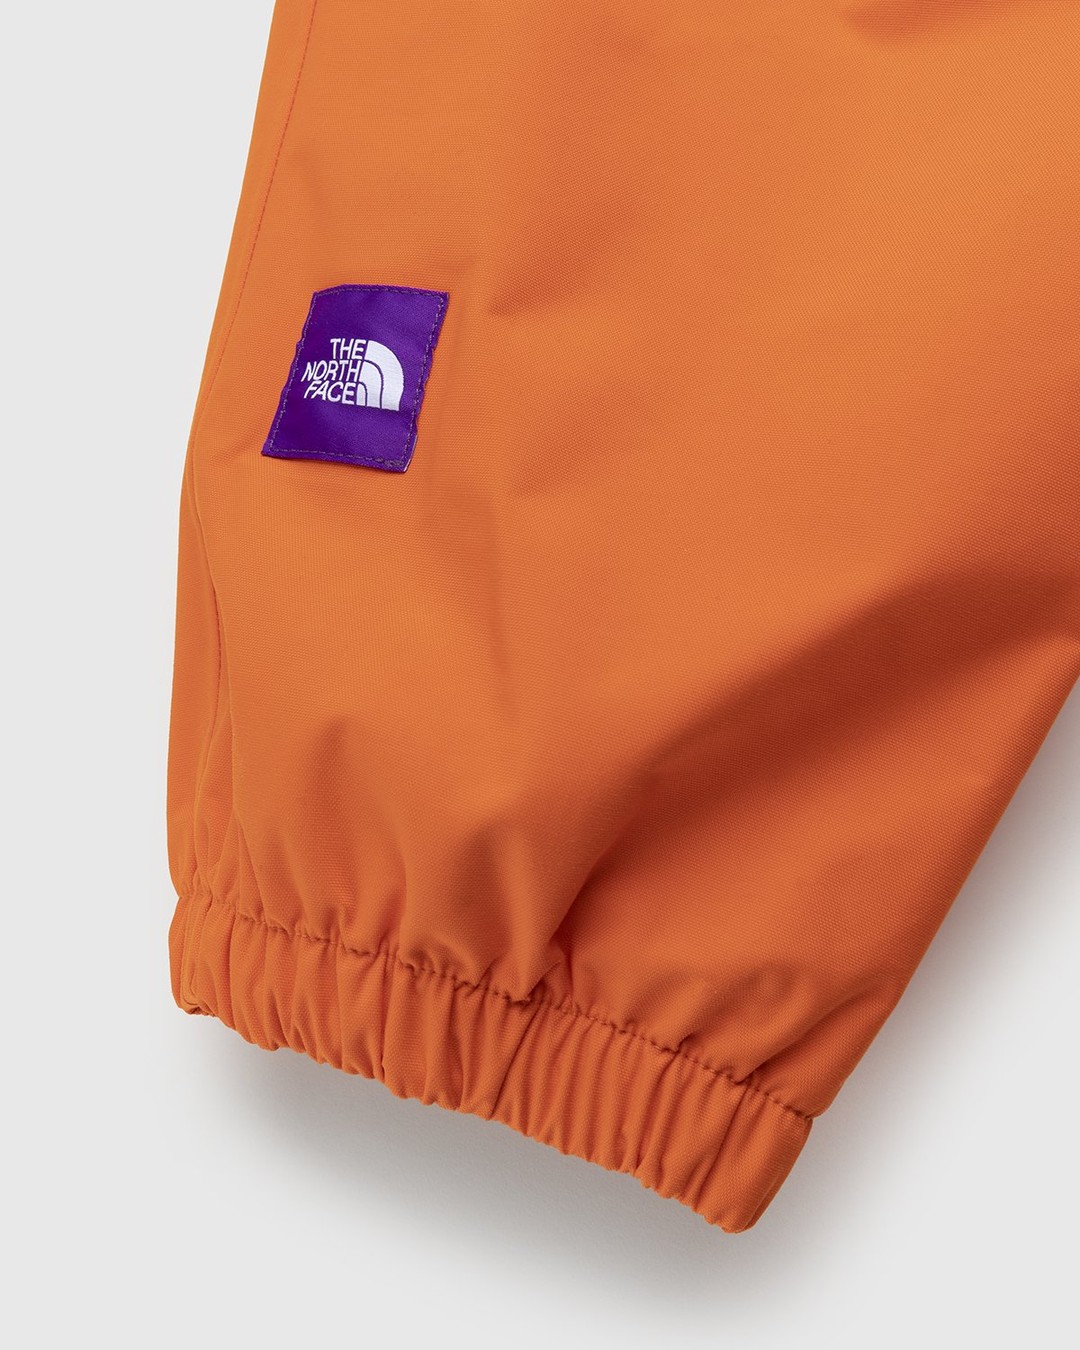 The North Face – Trans Antarctica Expedition Parka Red Orange - Outerwear - Orange - Image 3